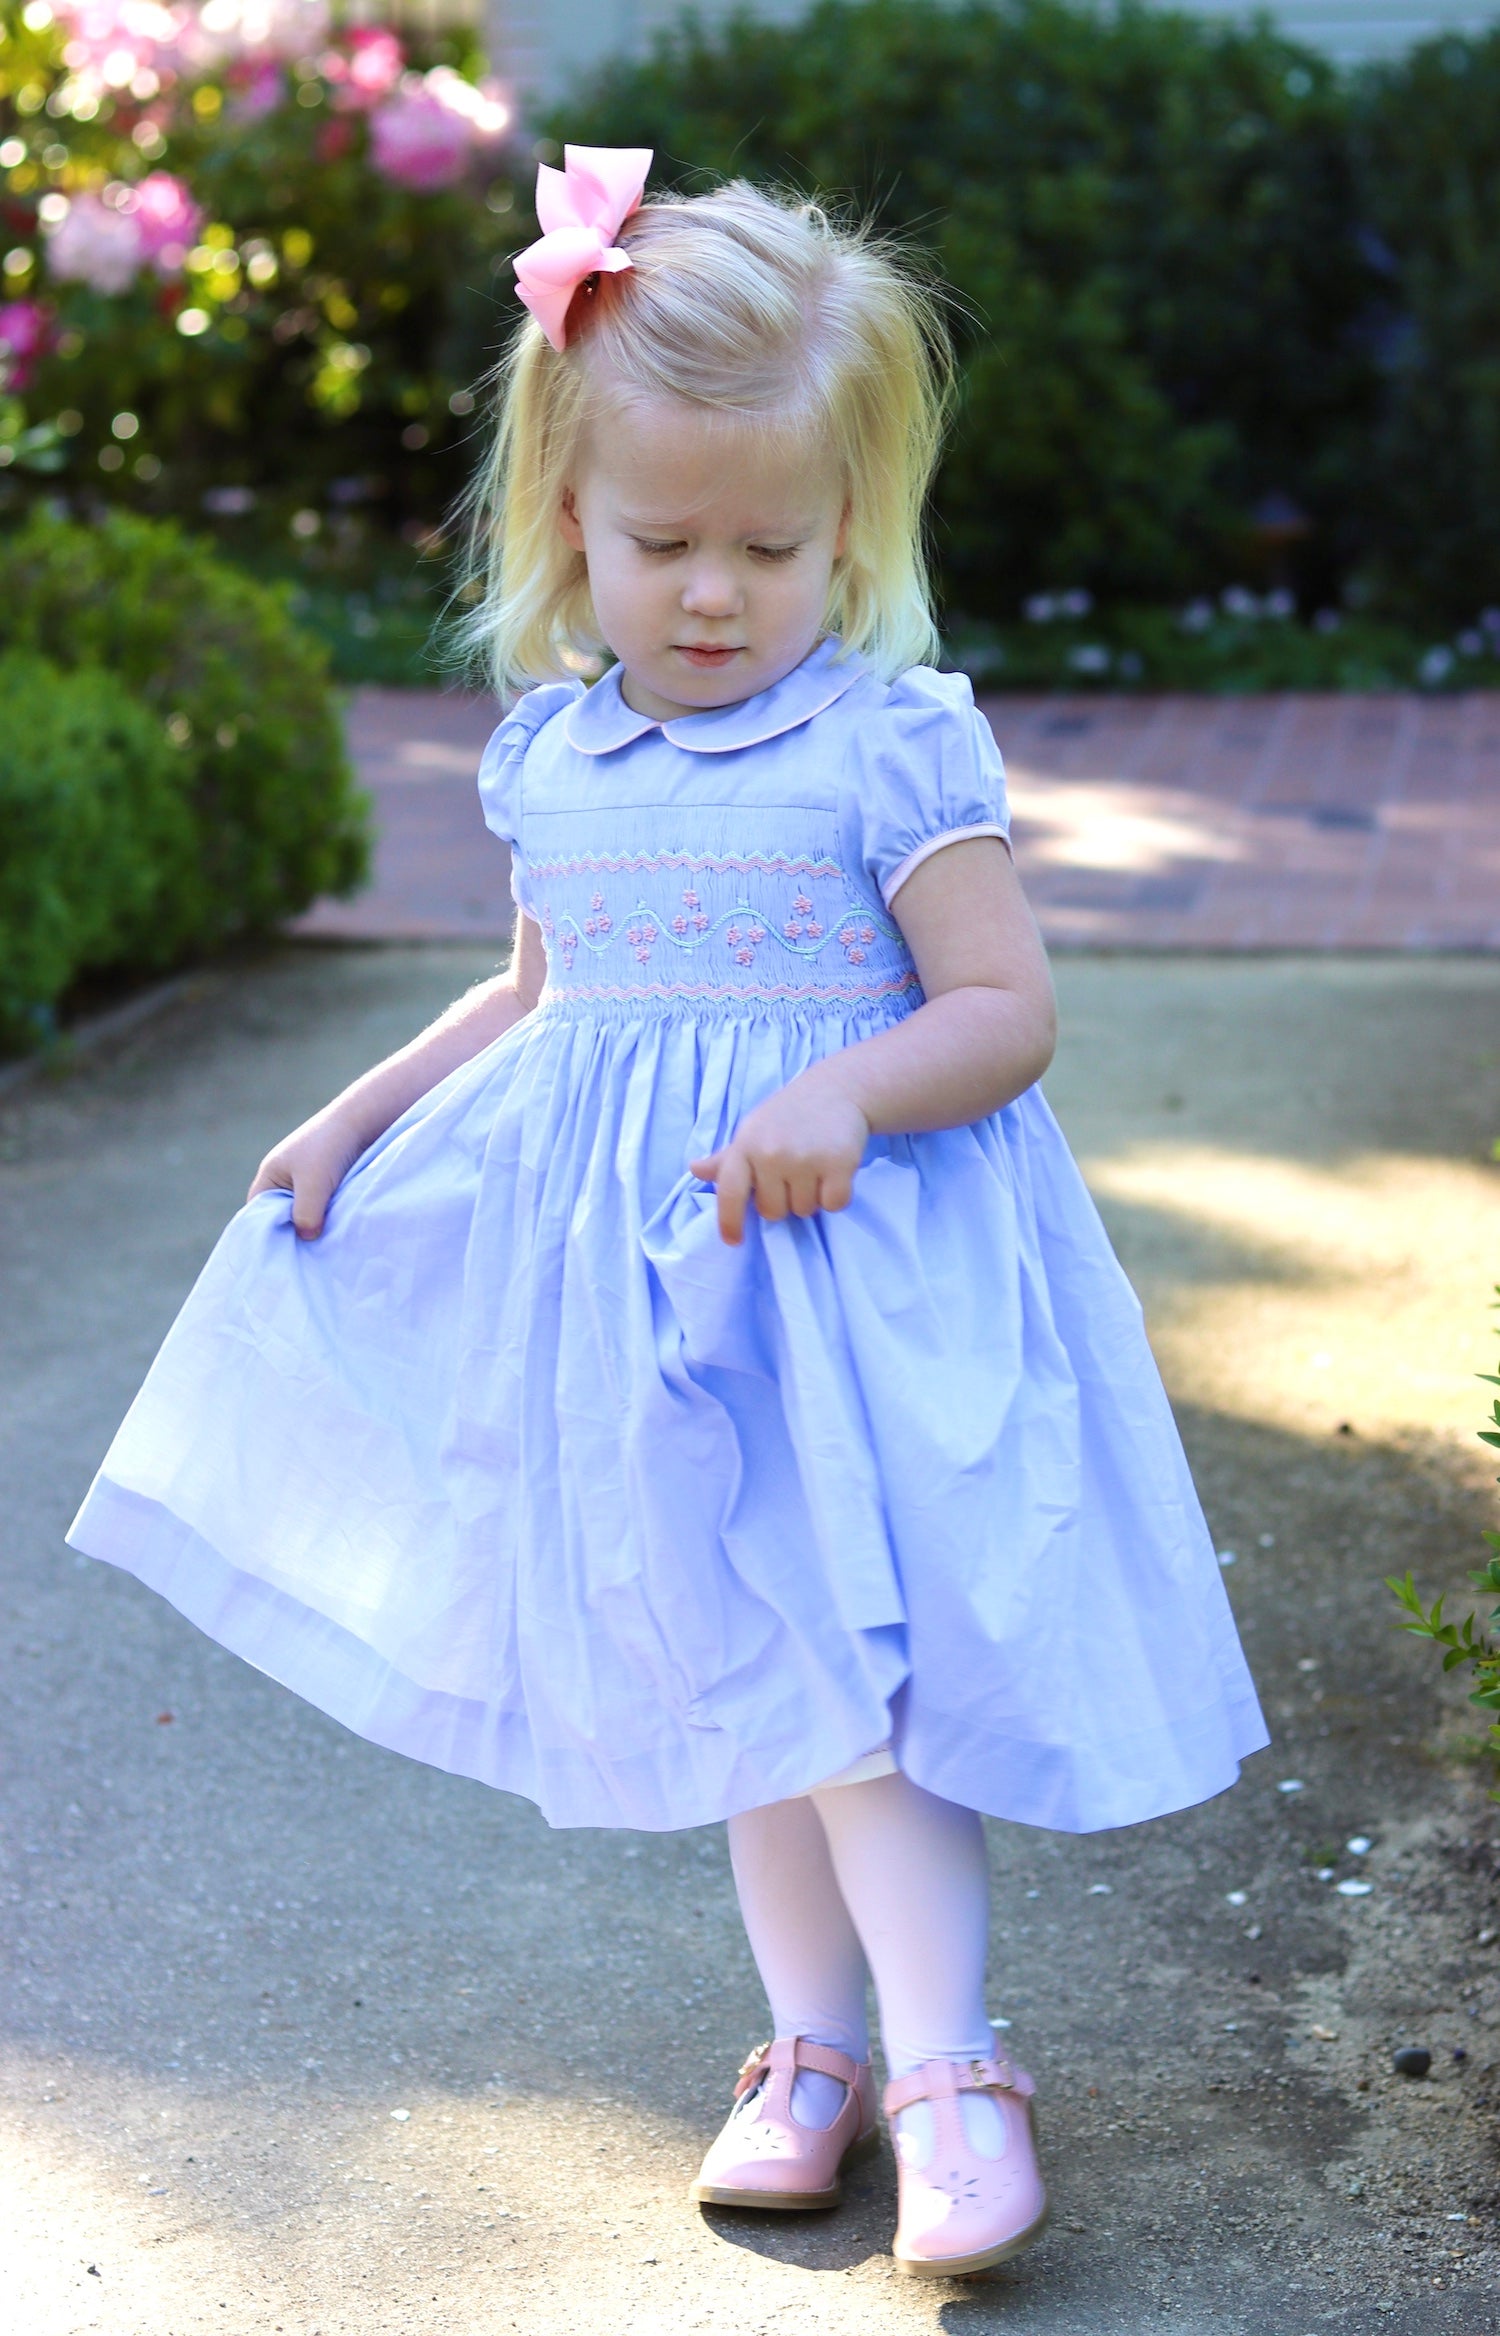 Charlotte sy Dimby classic chic little princess twirling handmade smocked dresses for babies and girls - precious elegant French style heirlooms California